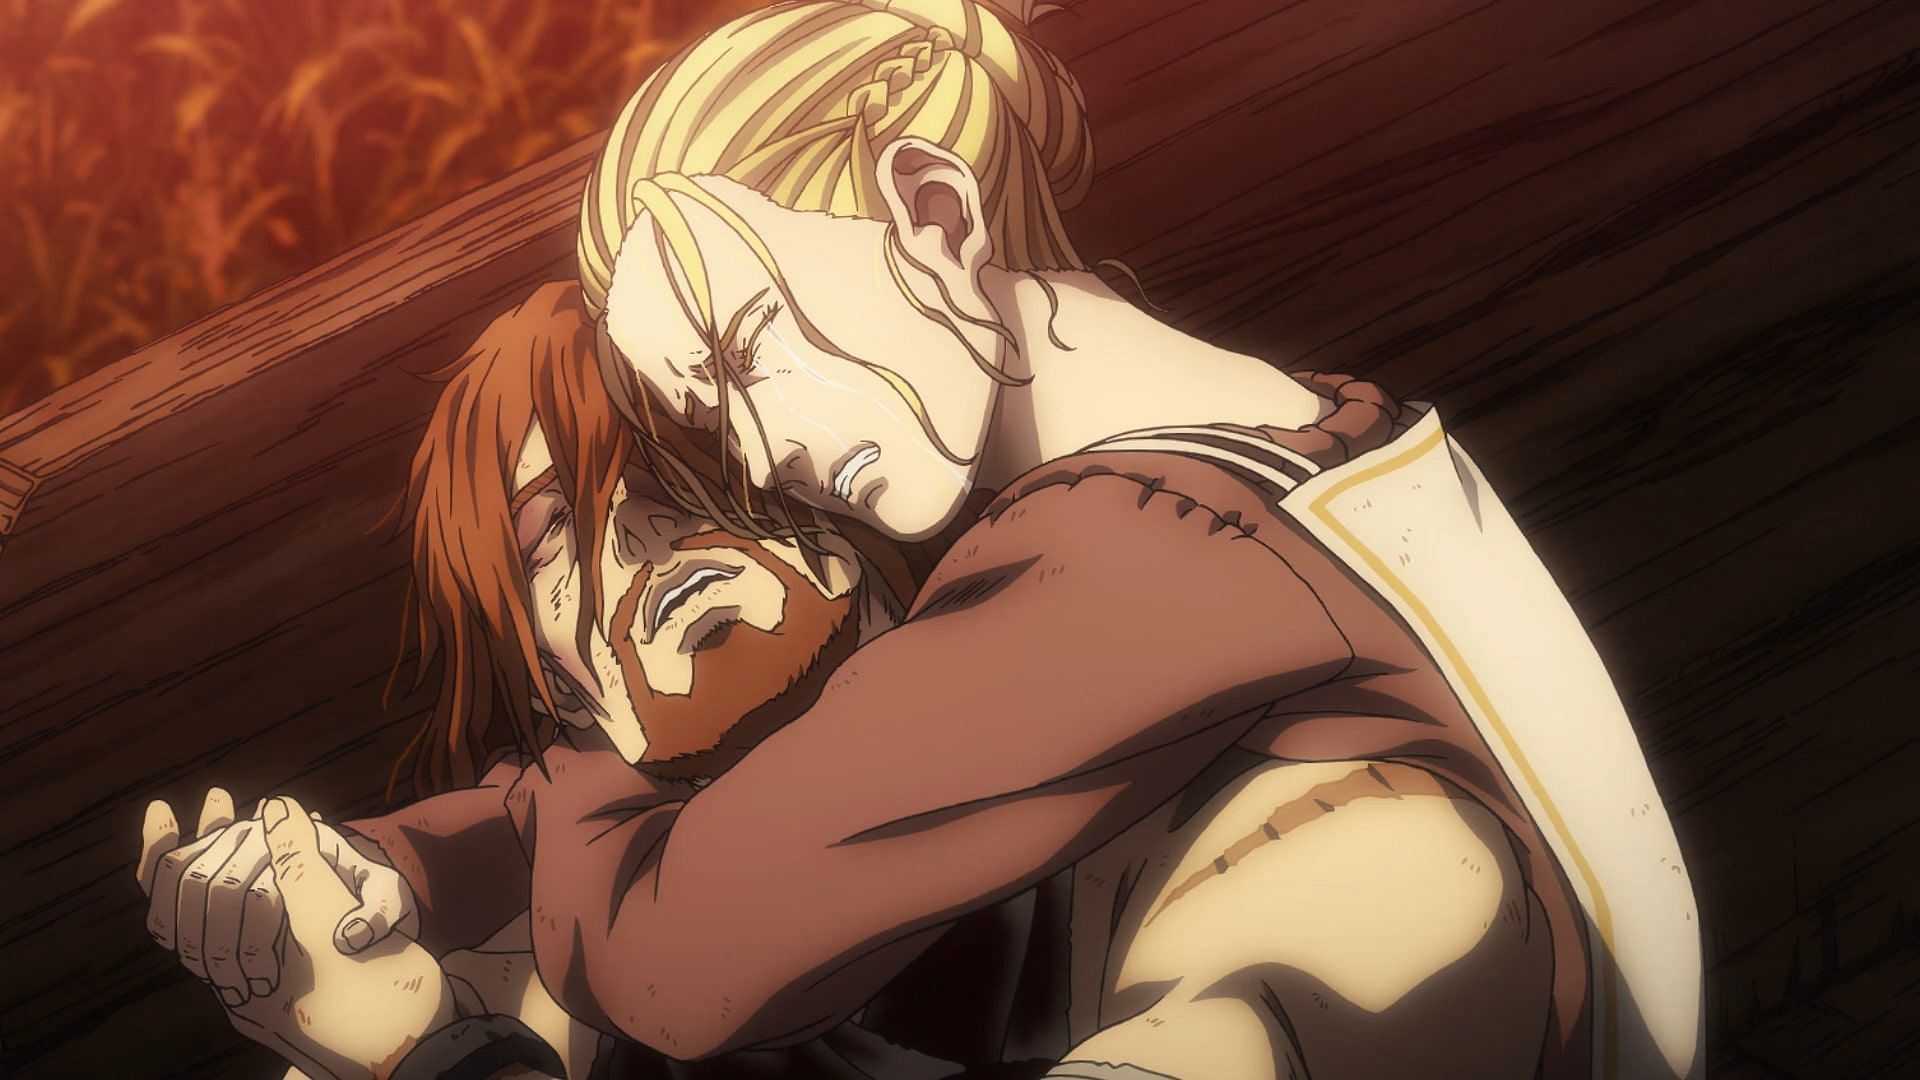 Vinland Saga season 2 episode 20: Release date and time, countdown, where to watch, and more (Image via MAPPA Studios)